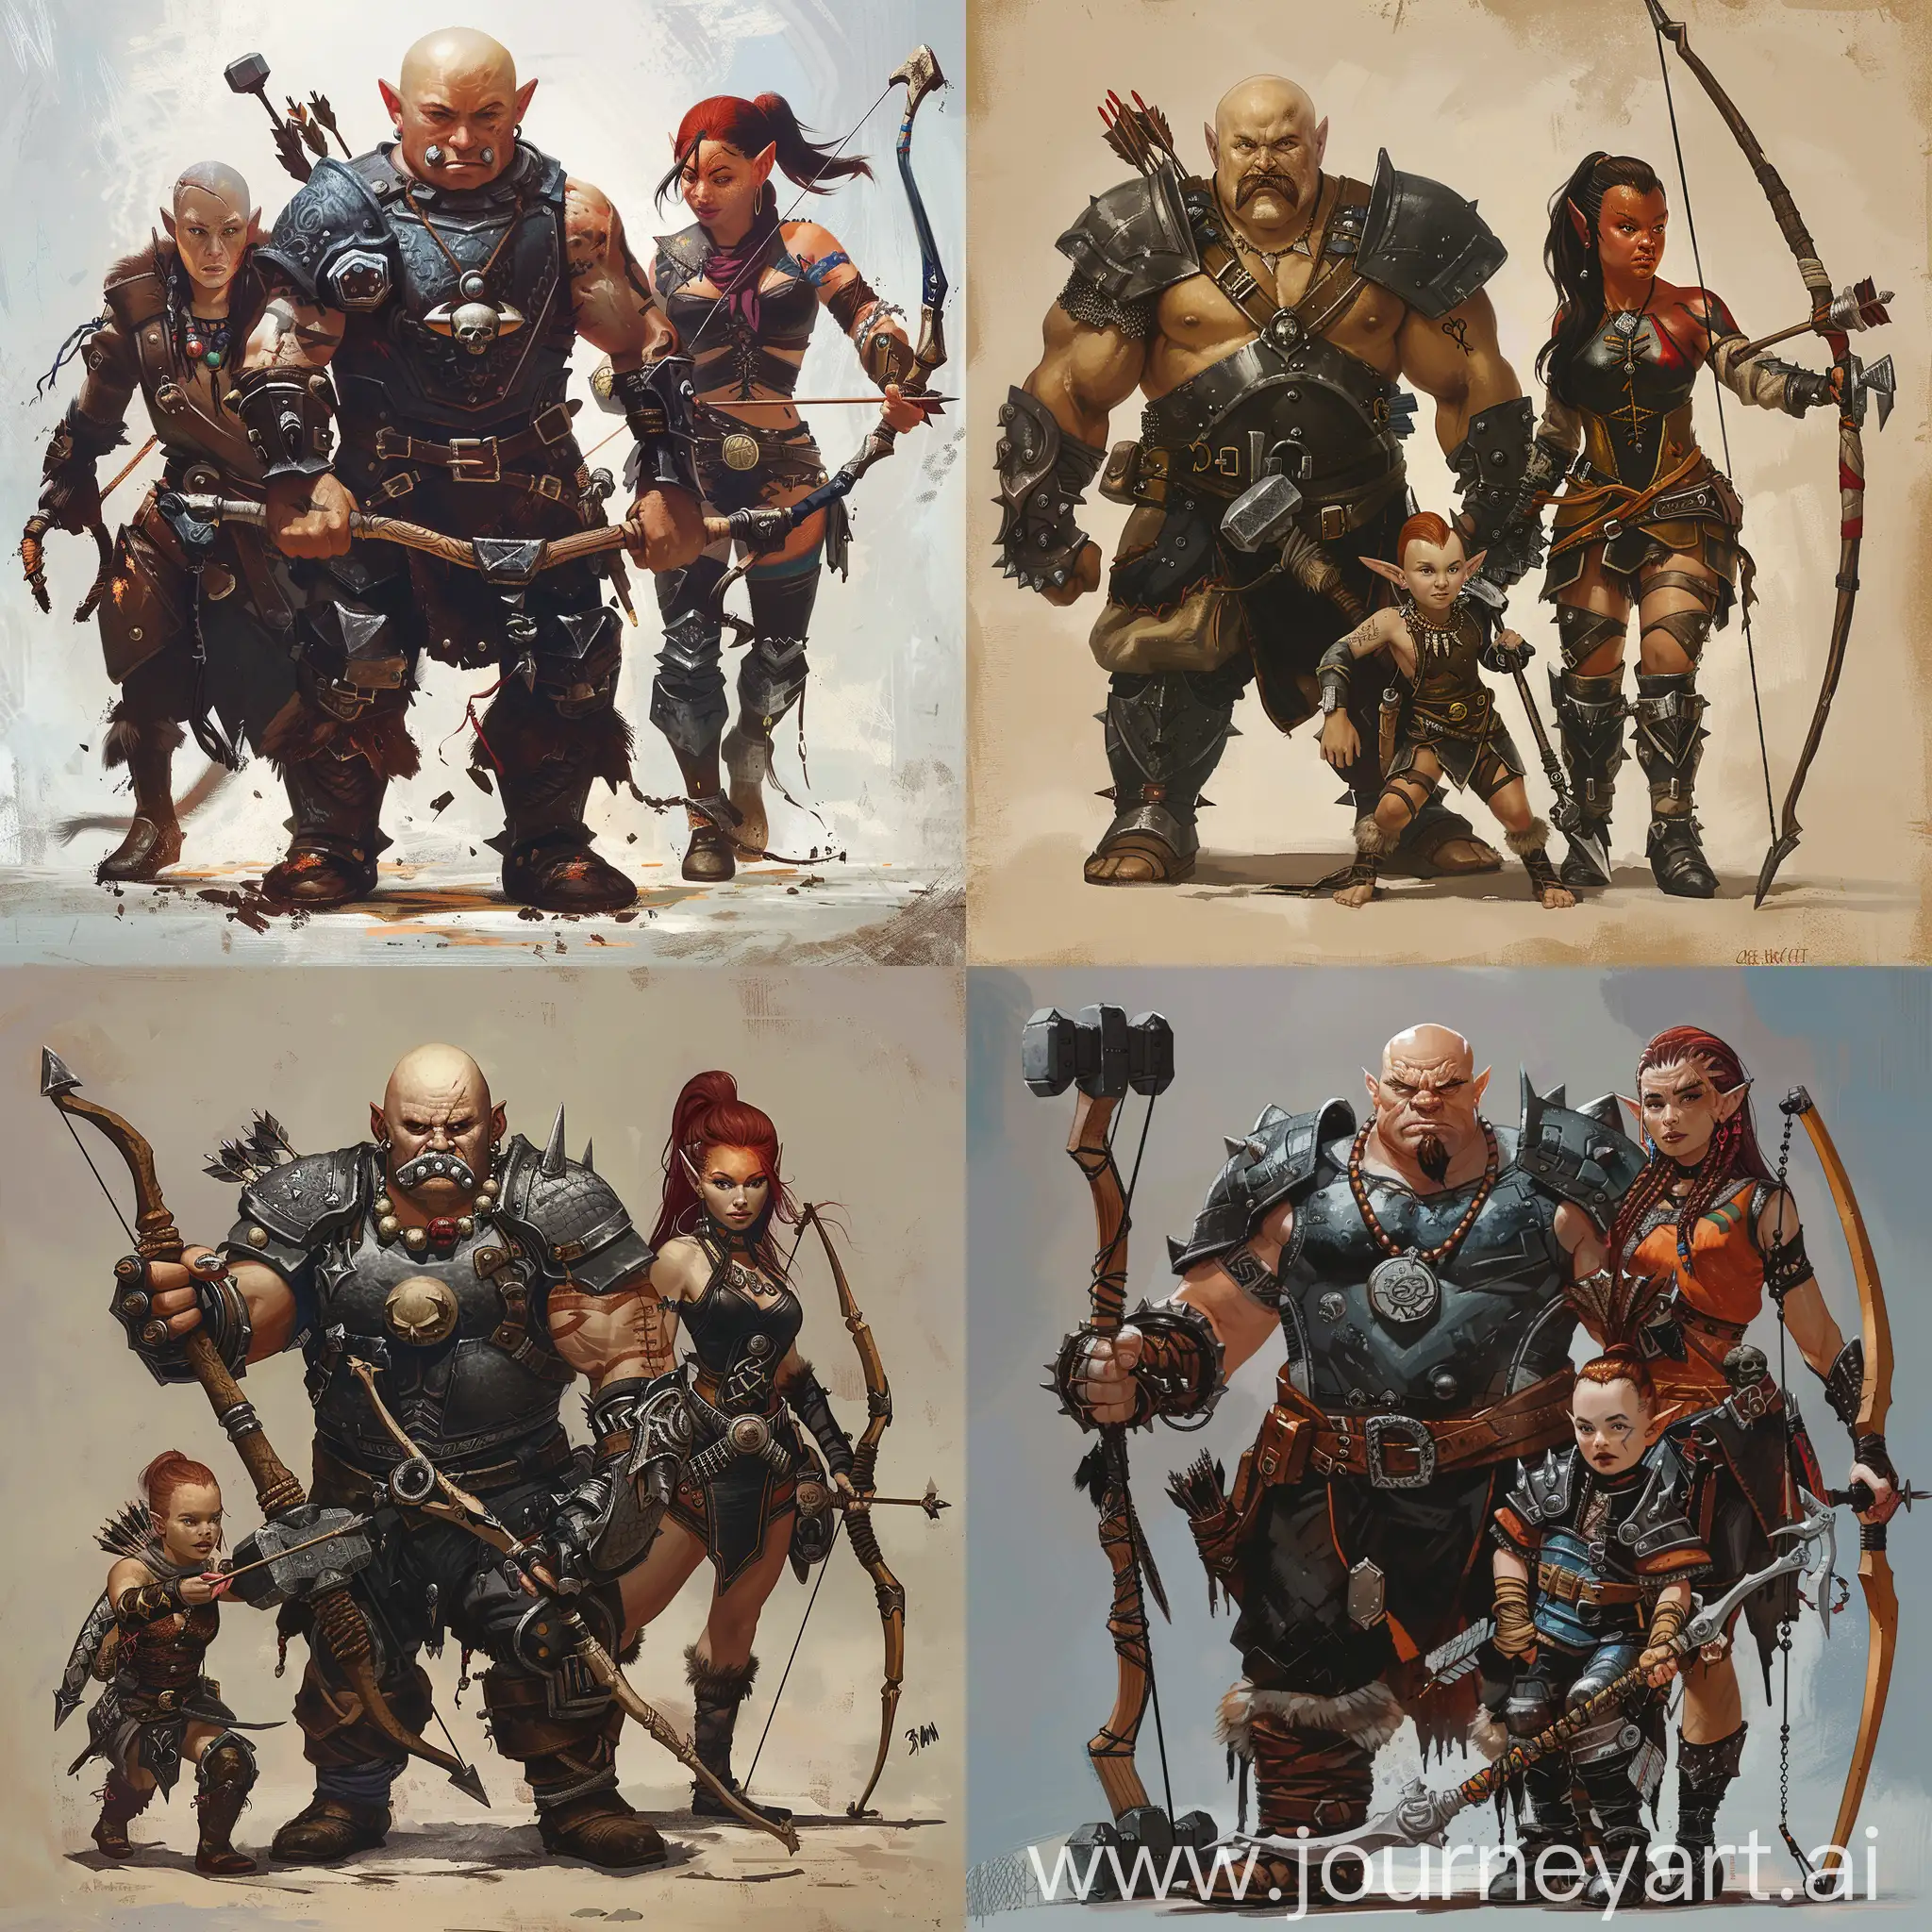 a fantasy bald dwarf wearing heavy armor and with a necklace representing a hammer, a fantasy human archer wearing a black light armor and a longbow with ponytailed brown hair, and a female tiefling with red skin a black hair with two daggers. They cooperate as a team